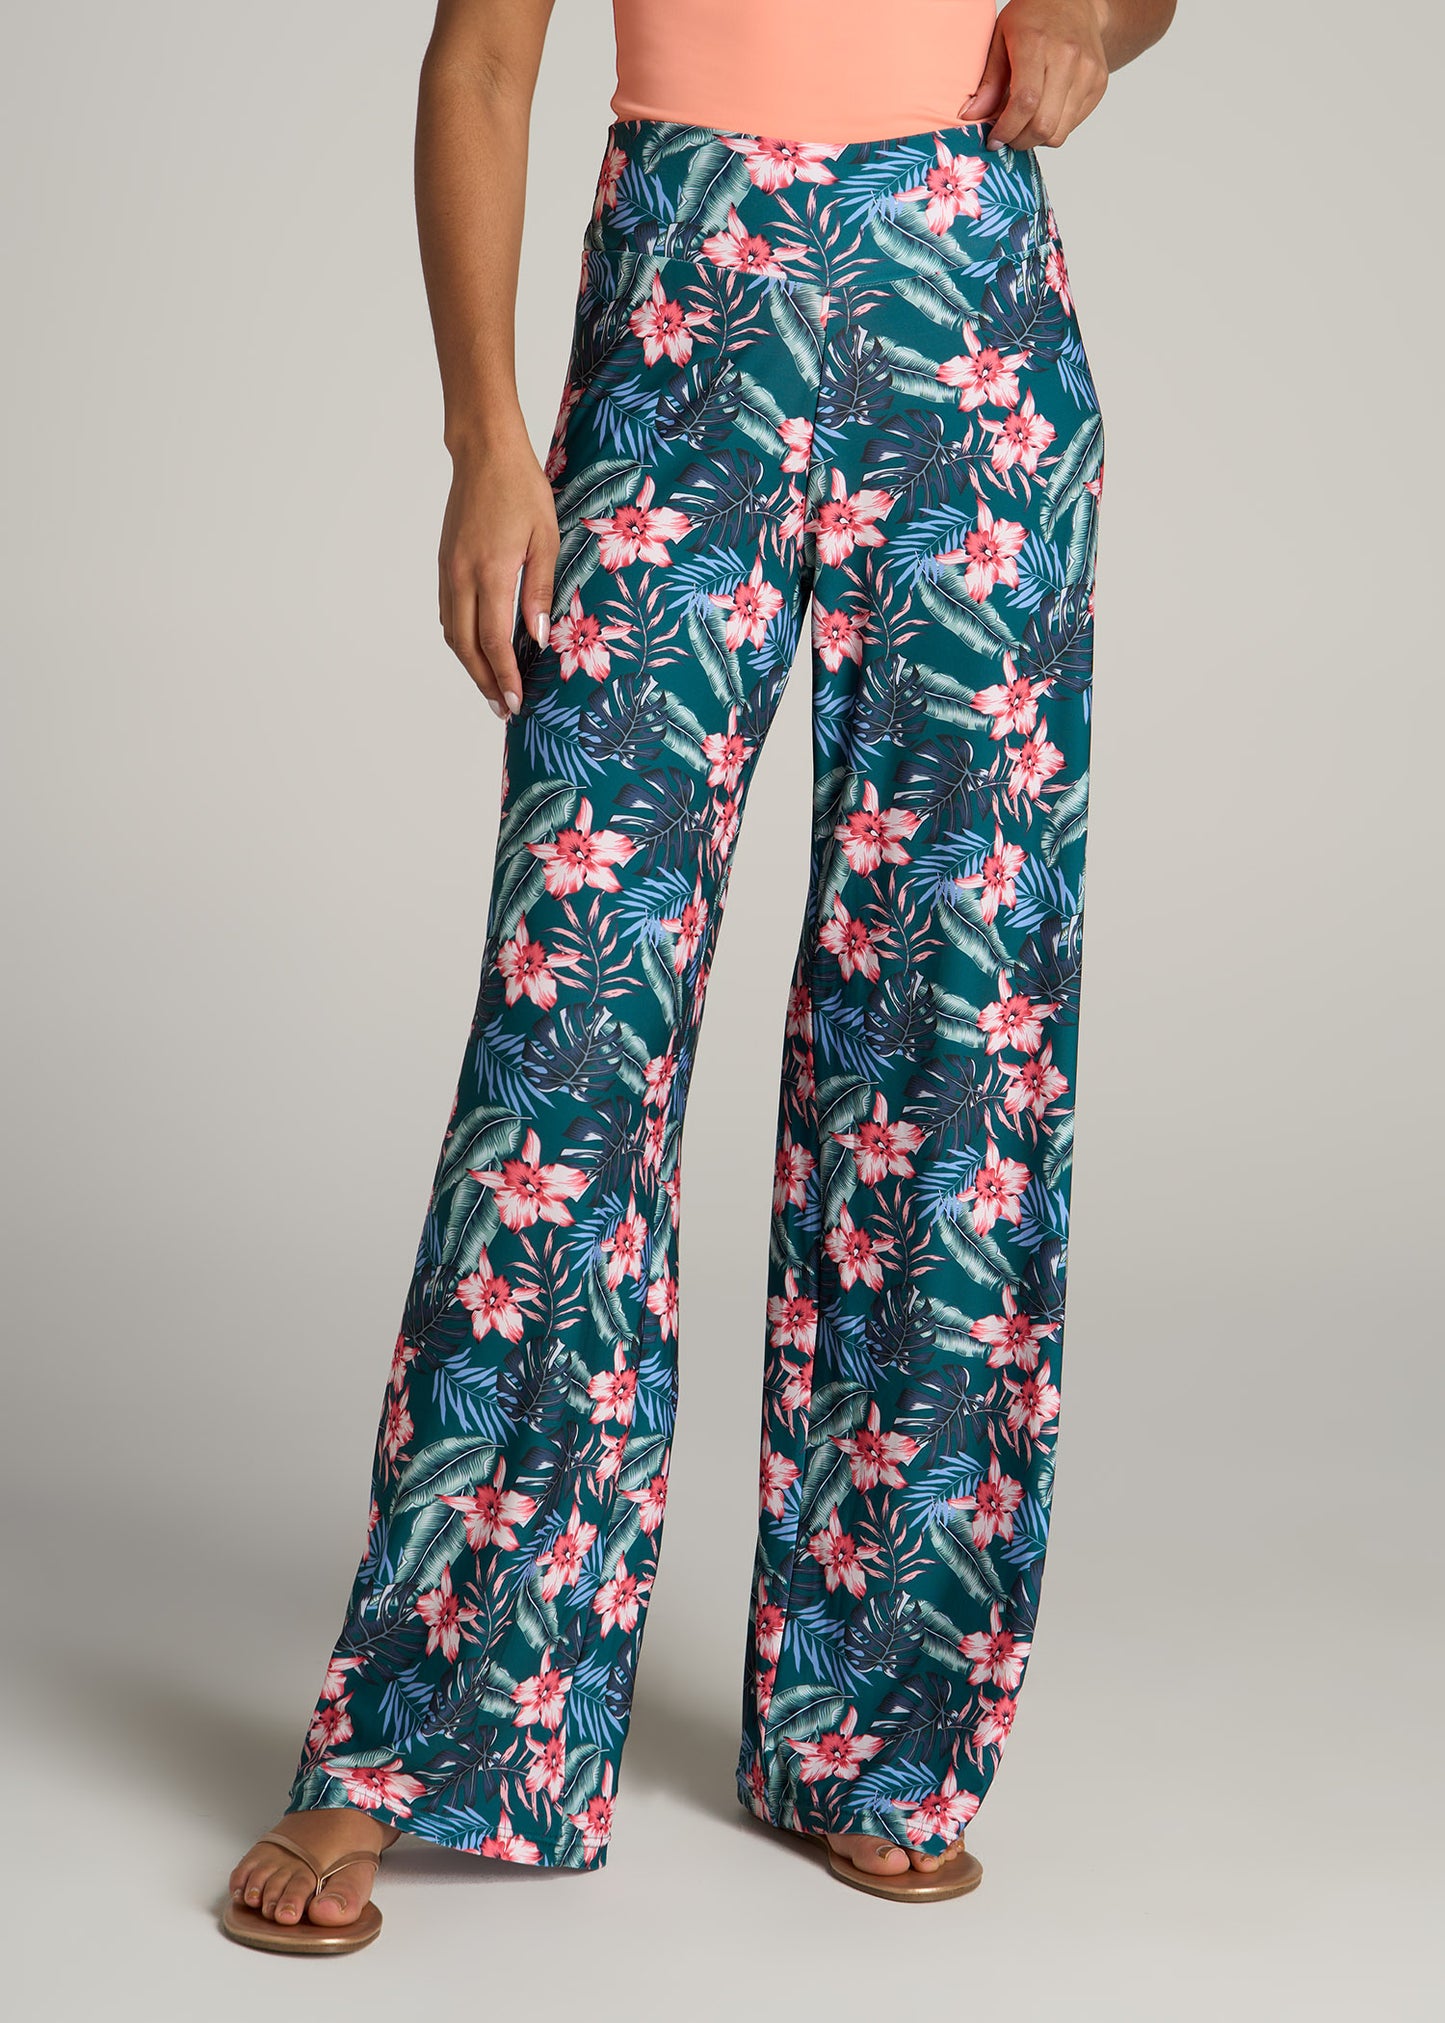 Jyeity Save Lots Of Time, Athletic Cropped Pants Floral Printing Elastic  Waist Beach Pants Try Before You Buy Womens Pants Green Size 5XL(US:18)